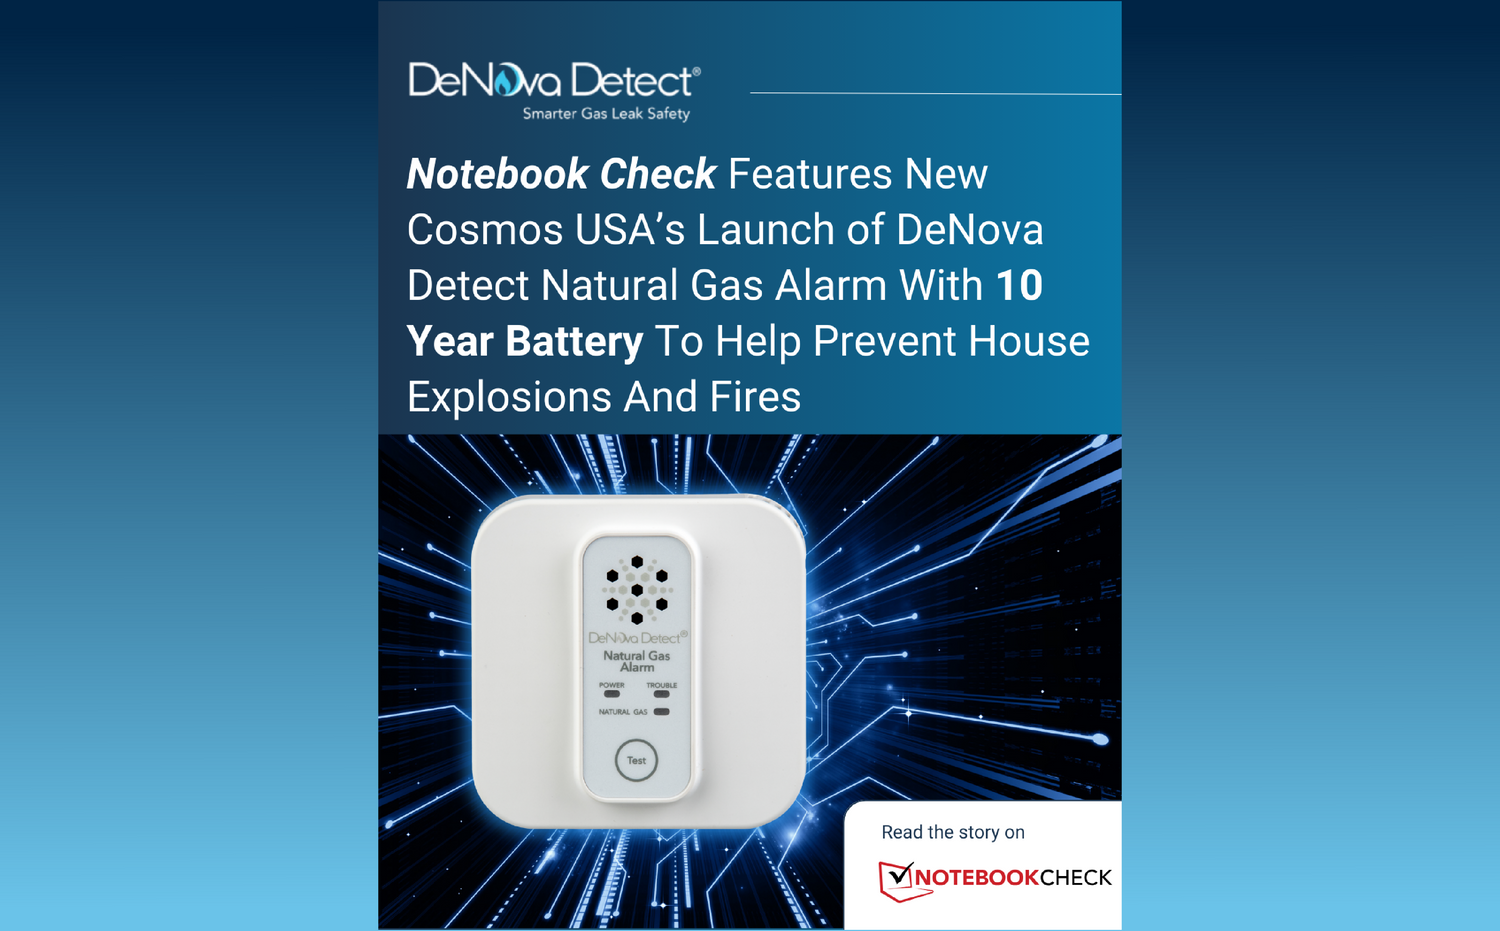 Notebook Check Features New Cosmos USA's Launch of Denova Detect Natural Gas Alarm With 10 Year Battery to Prevent House Explosions and Fires